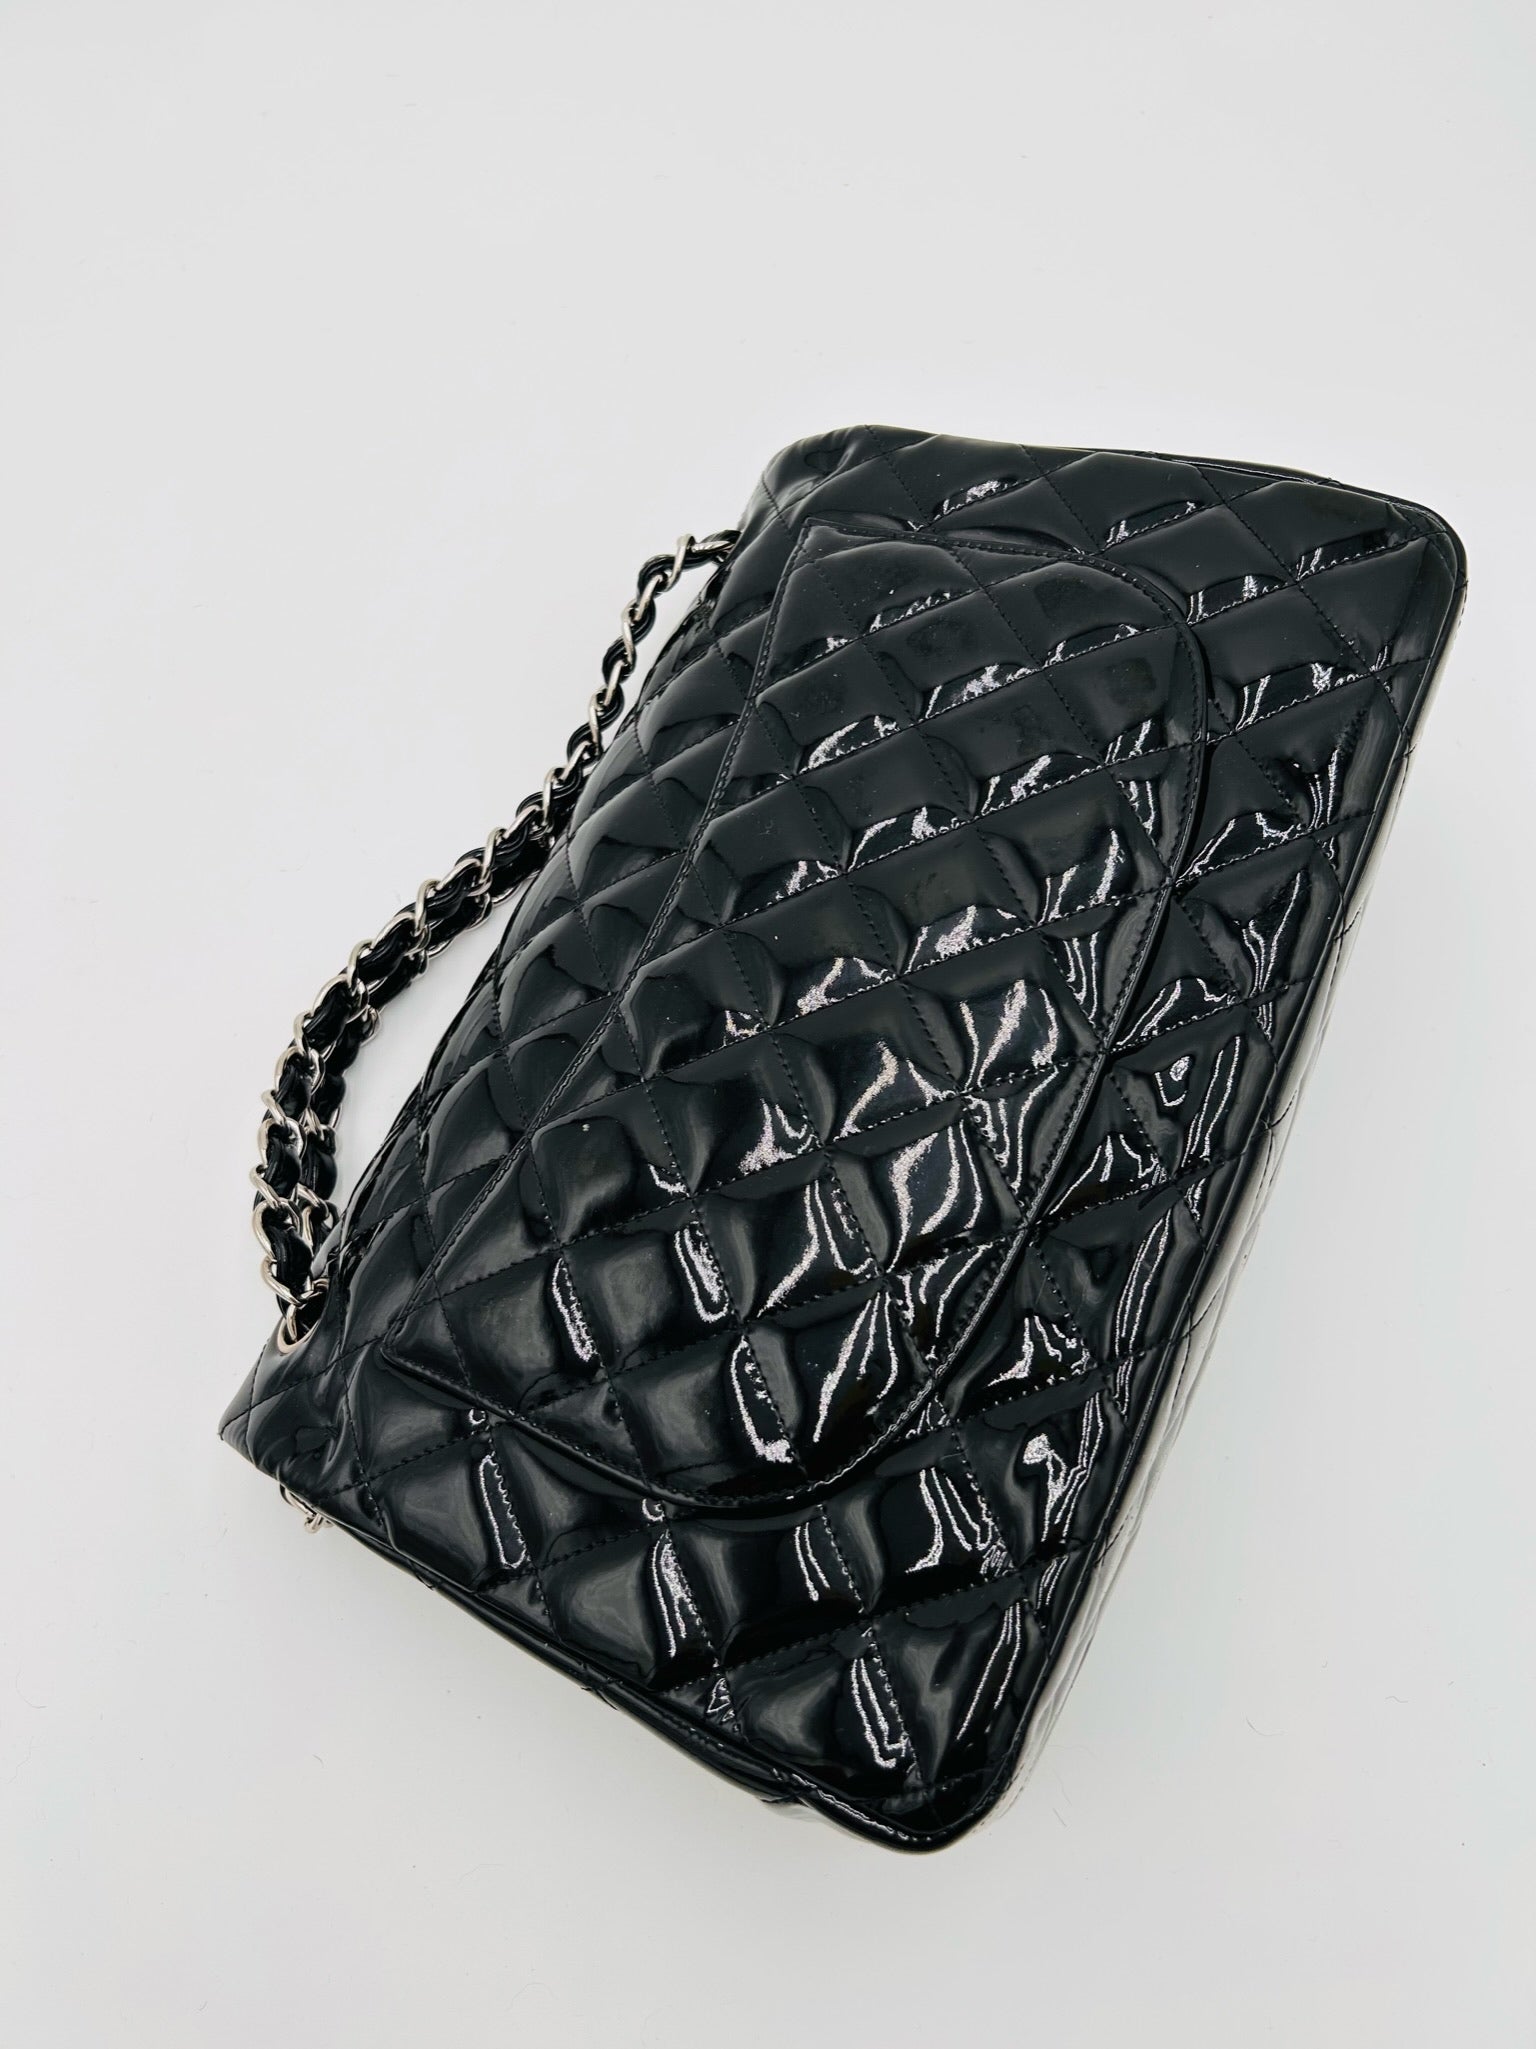 CHANEL BLACK QUILTED PATENT LEATHER MEDIUM CLASSIC DOUBLE FLAP BAG